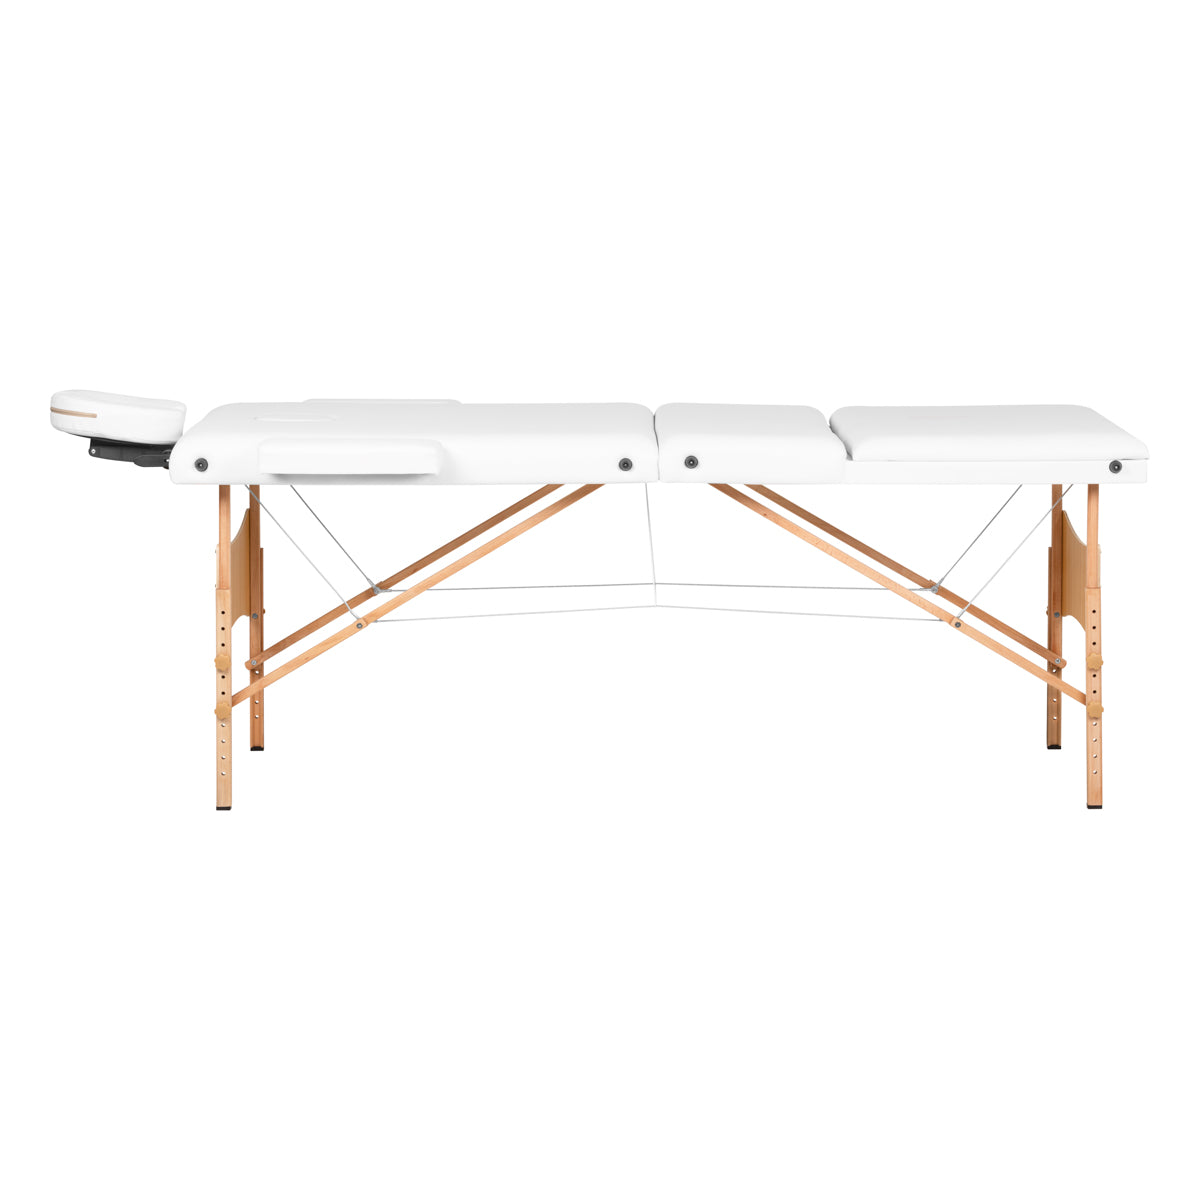 WOODEN FOLDING TABLE FOR MASSAGE COMFORT ACTIVFIZJO LUX 3 SECTIONS 190X70 WHITE